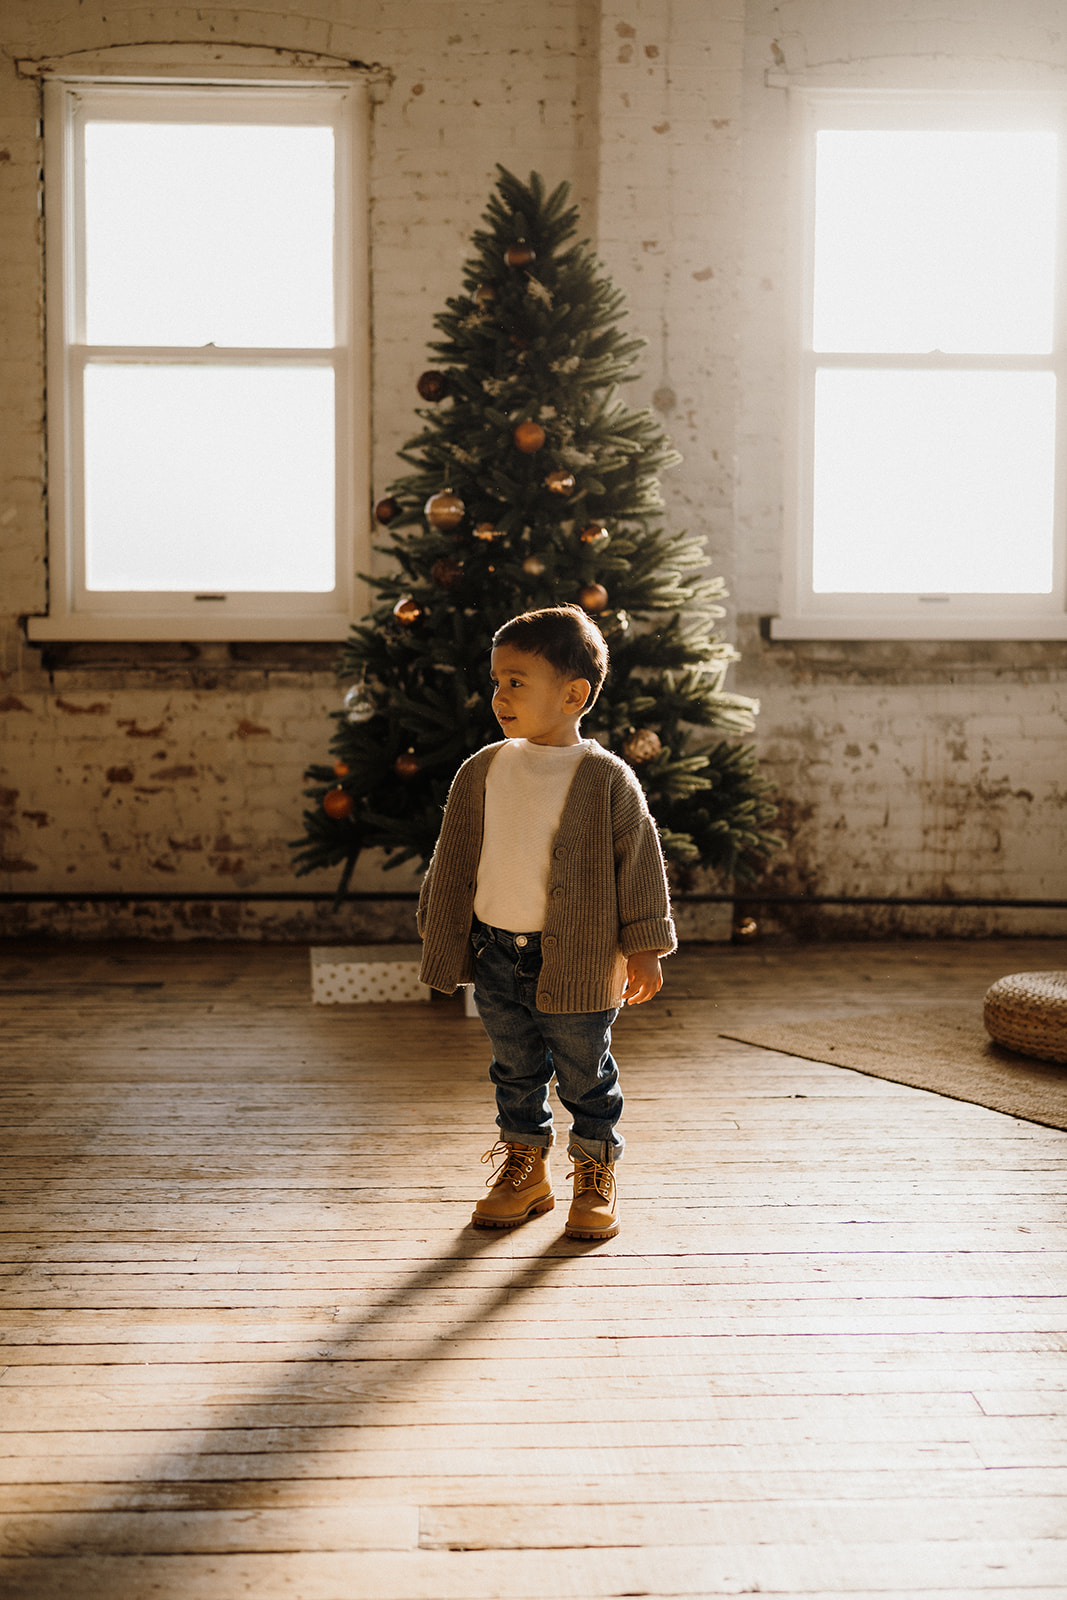 A child standing in front of a Christmas Tree inside.